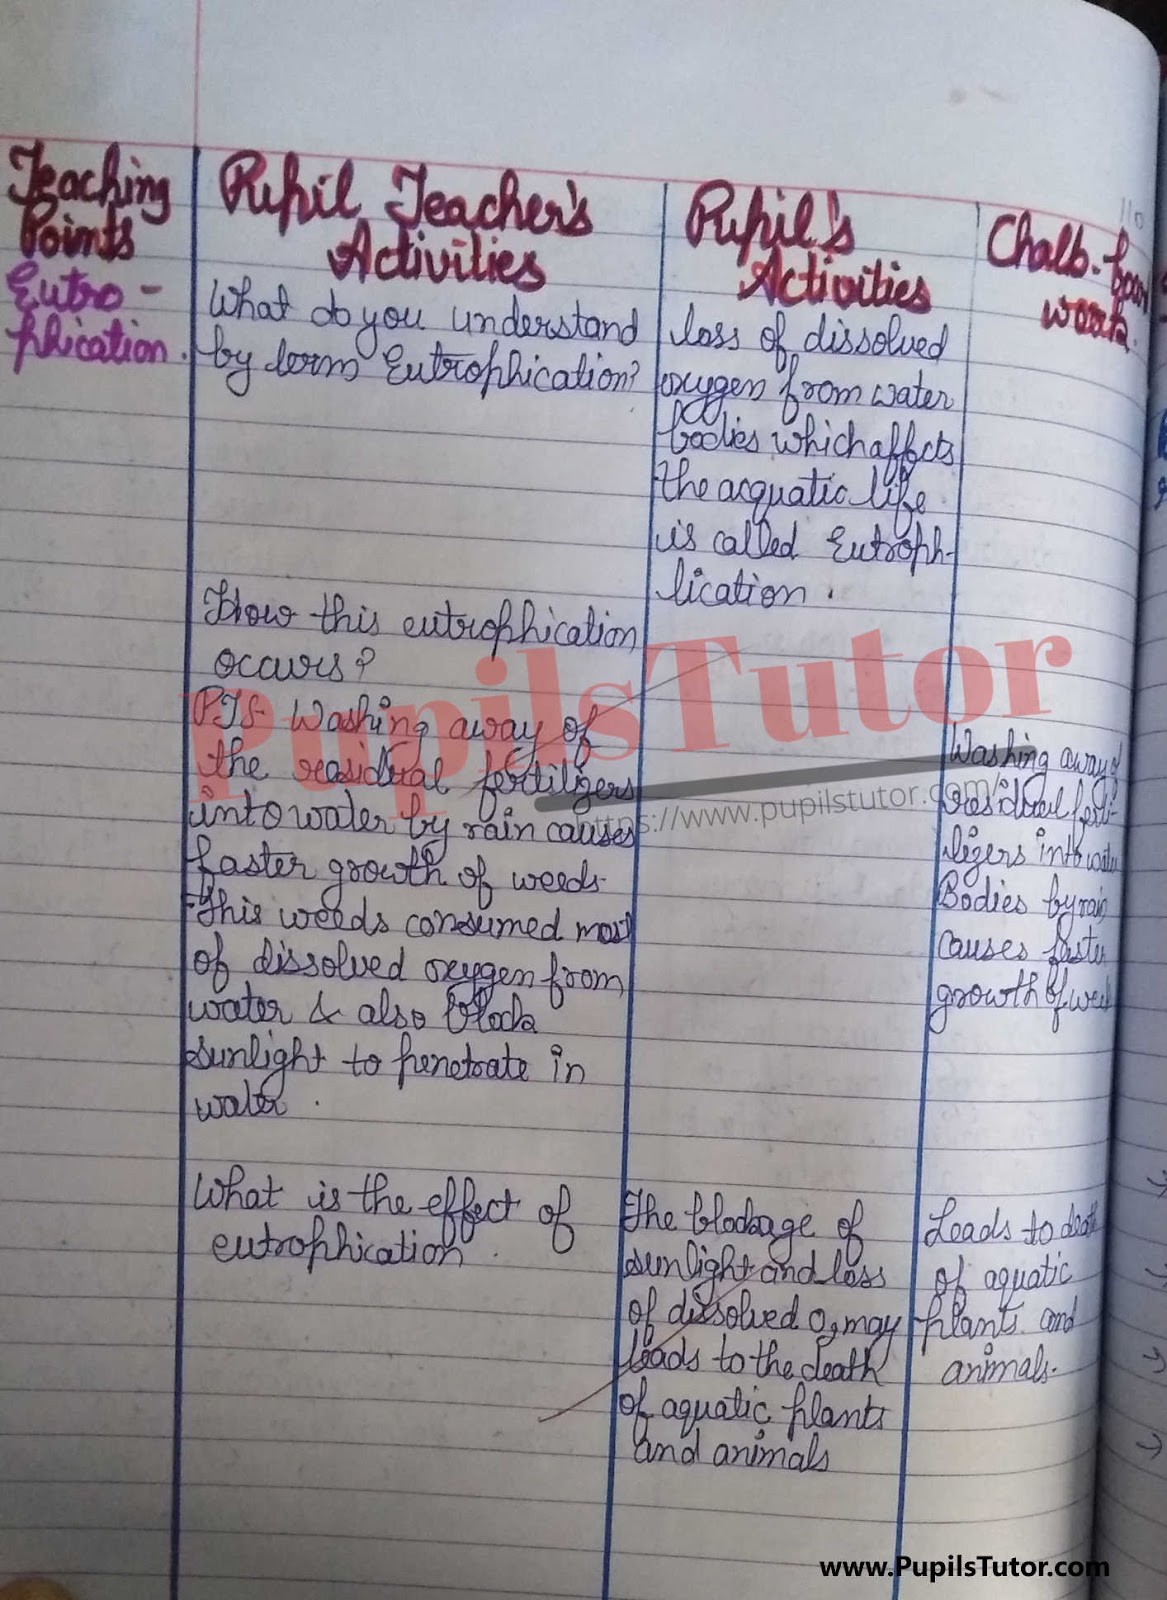 BED, DELED, BTC, BSTC, M.ED, DED And NIOS Teaching Of General Science And Social Studies Innovative Digital Lesson Plan Format On Water Pollution Topic For Class 4th 5th 6th 7th 8th 9th, 10th, 11th, 12th  – [Page And Photo 4] – pupilstutor.com